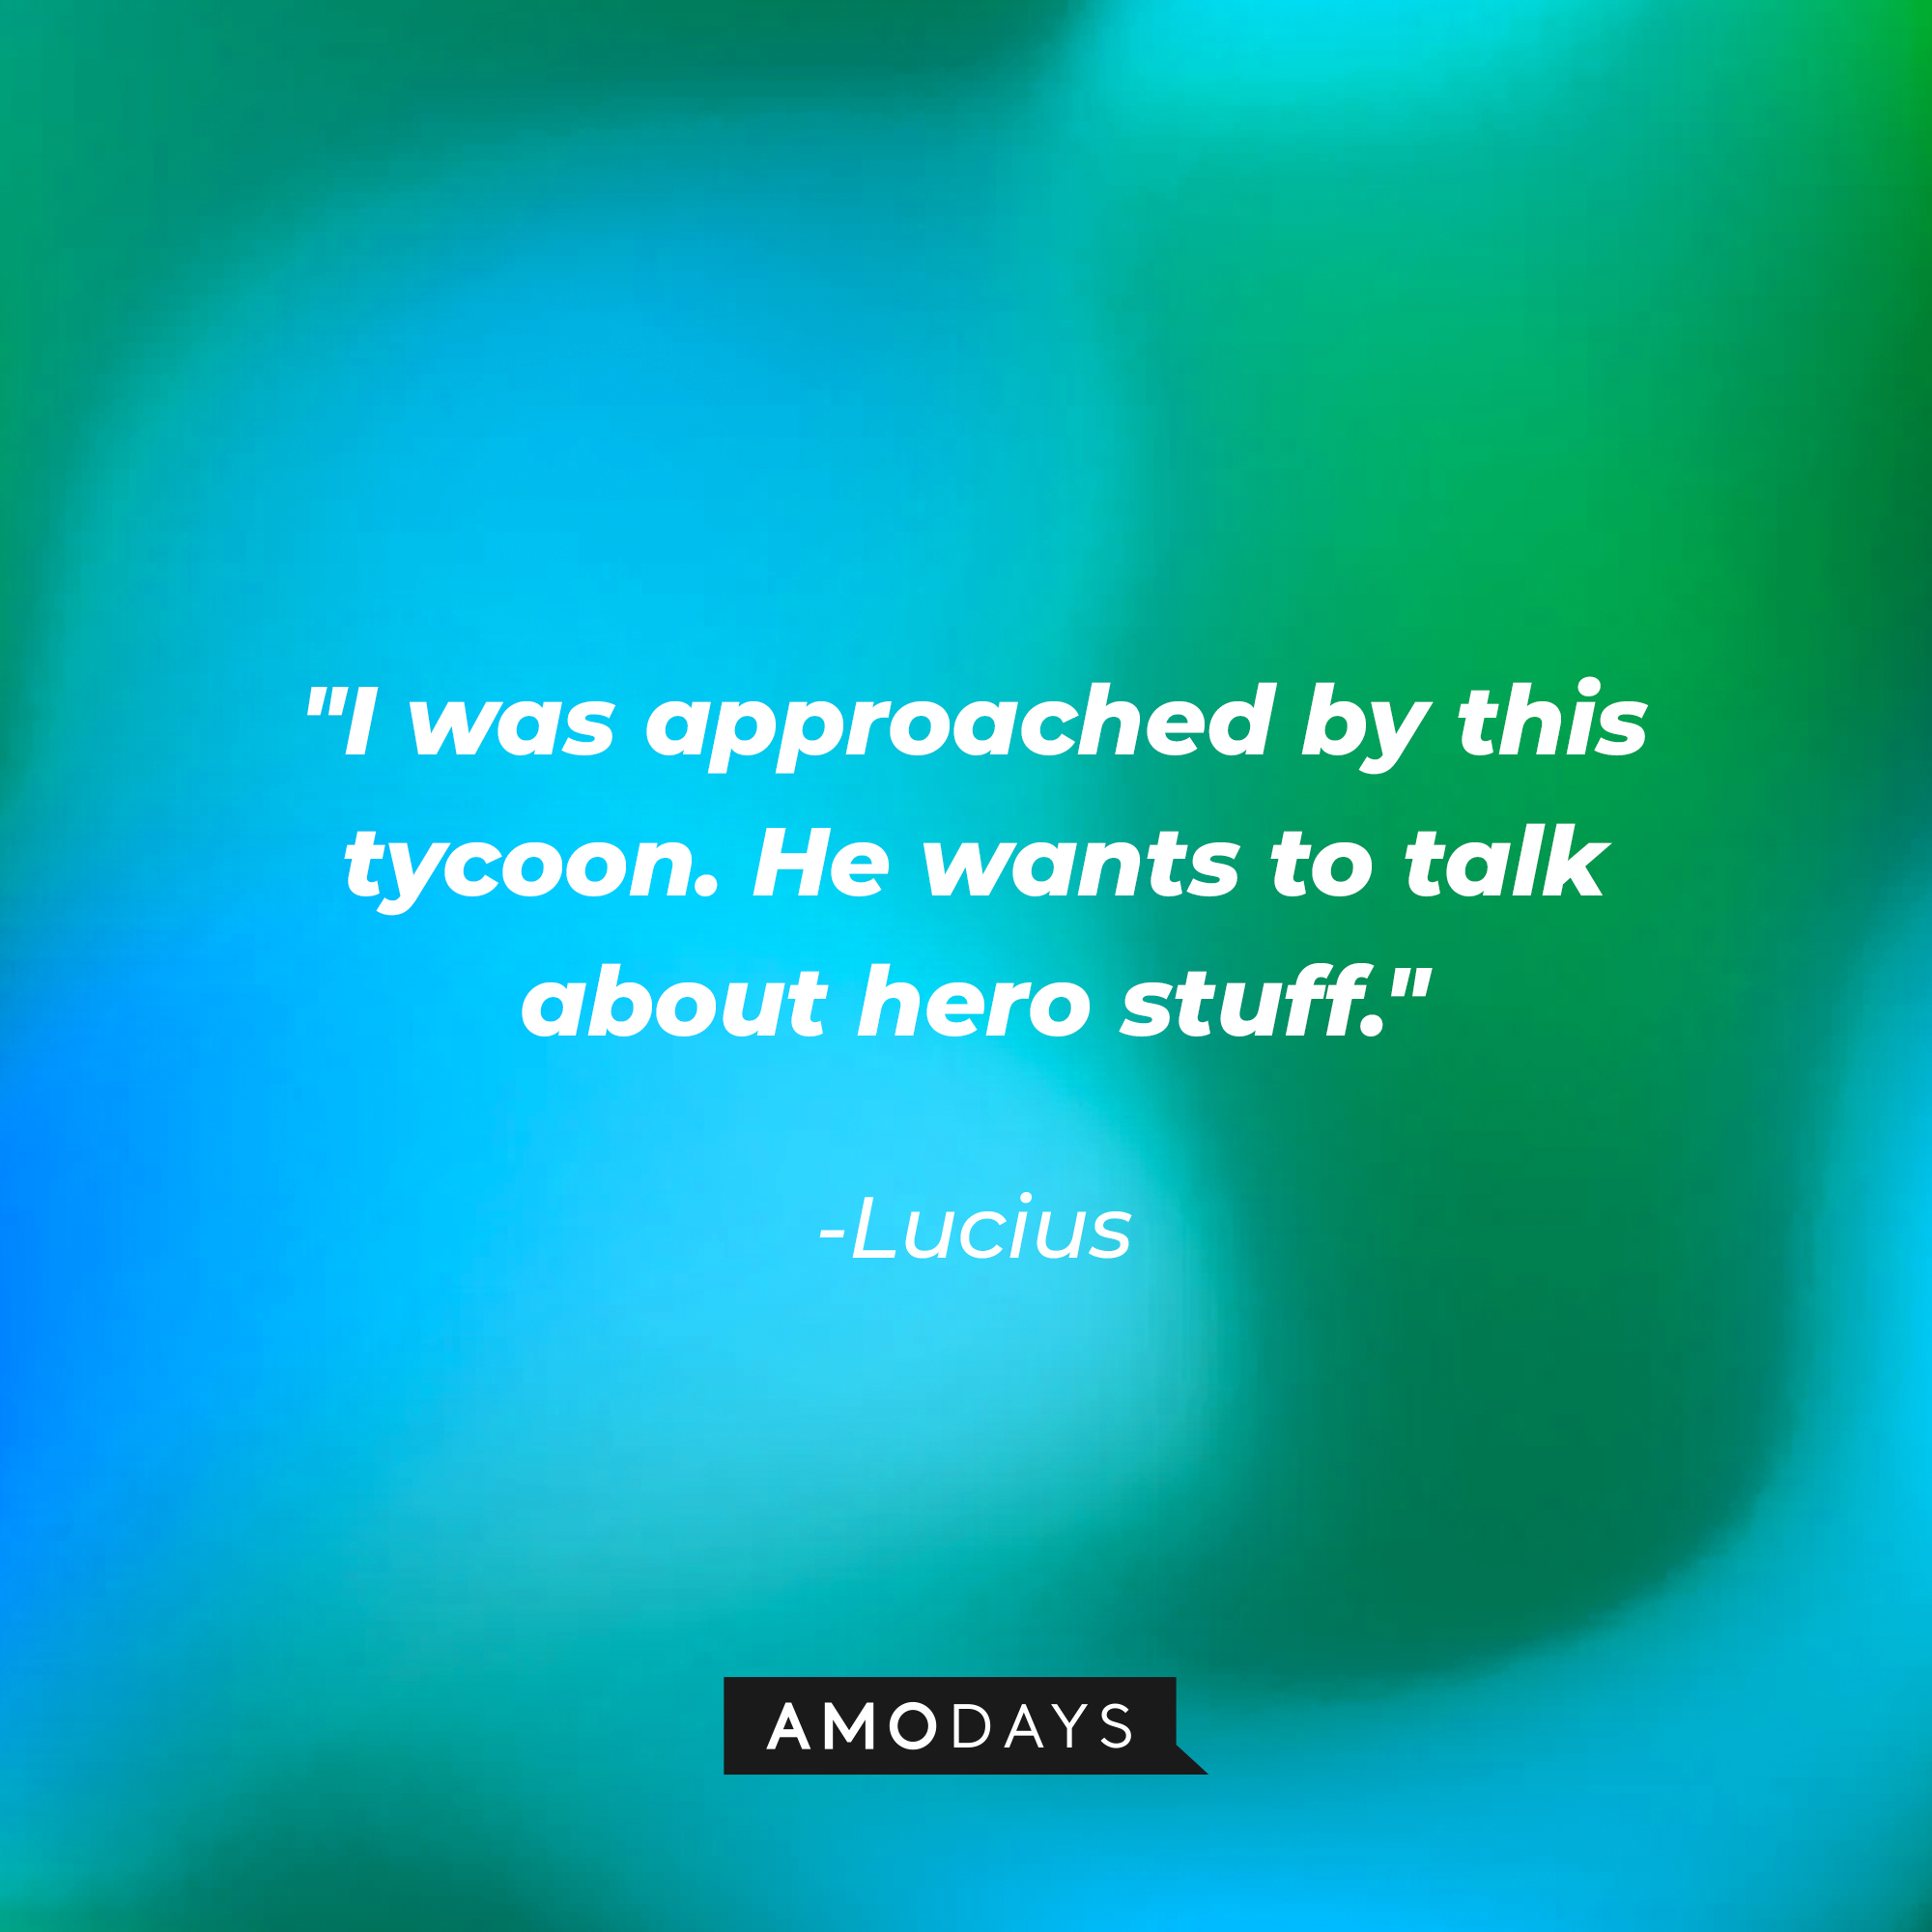 Lucius' quote: "I was approached by this tycoon. He wants to talk about hero stuff" | Source: Amodays